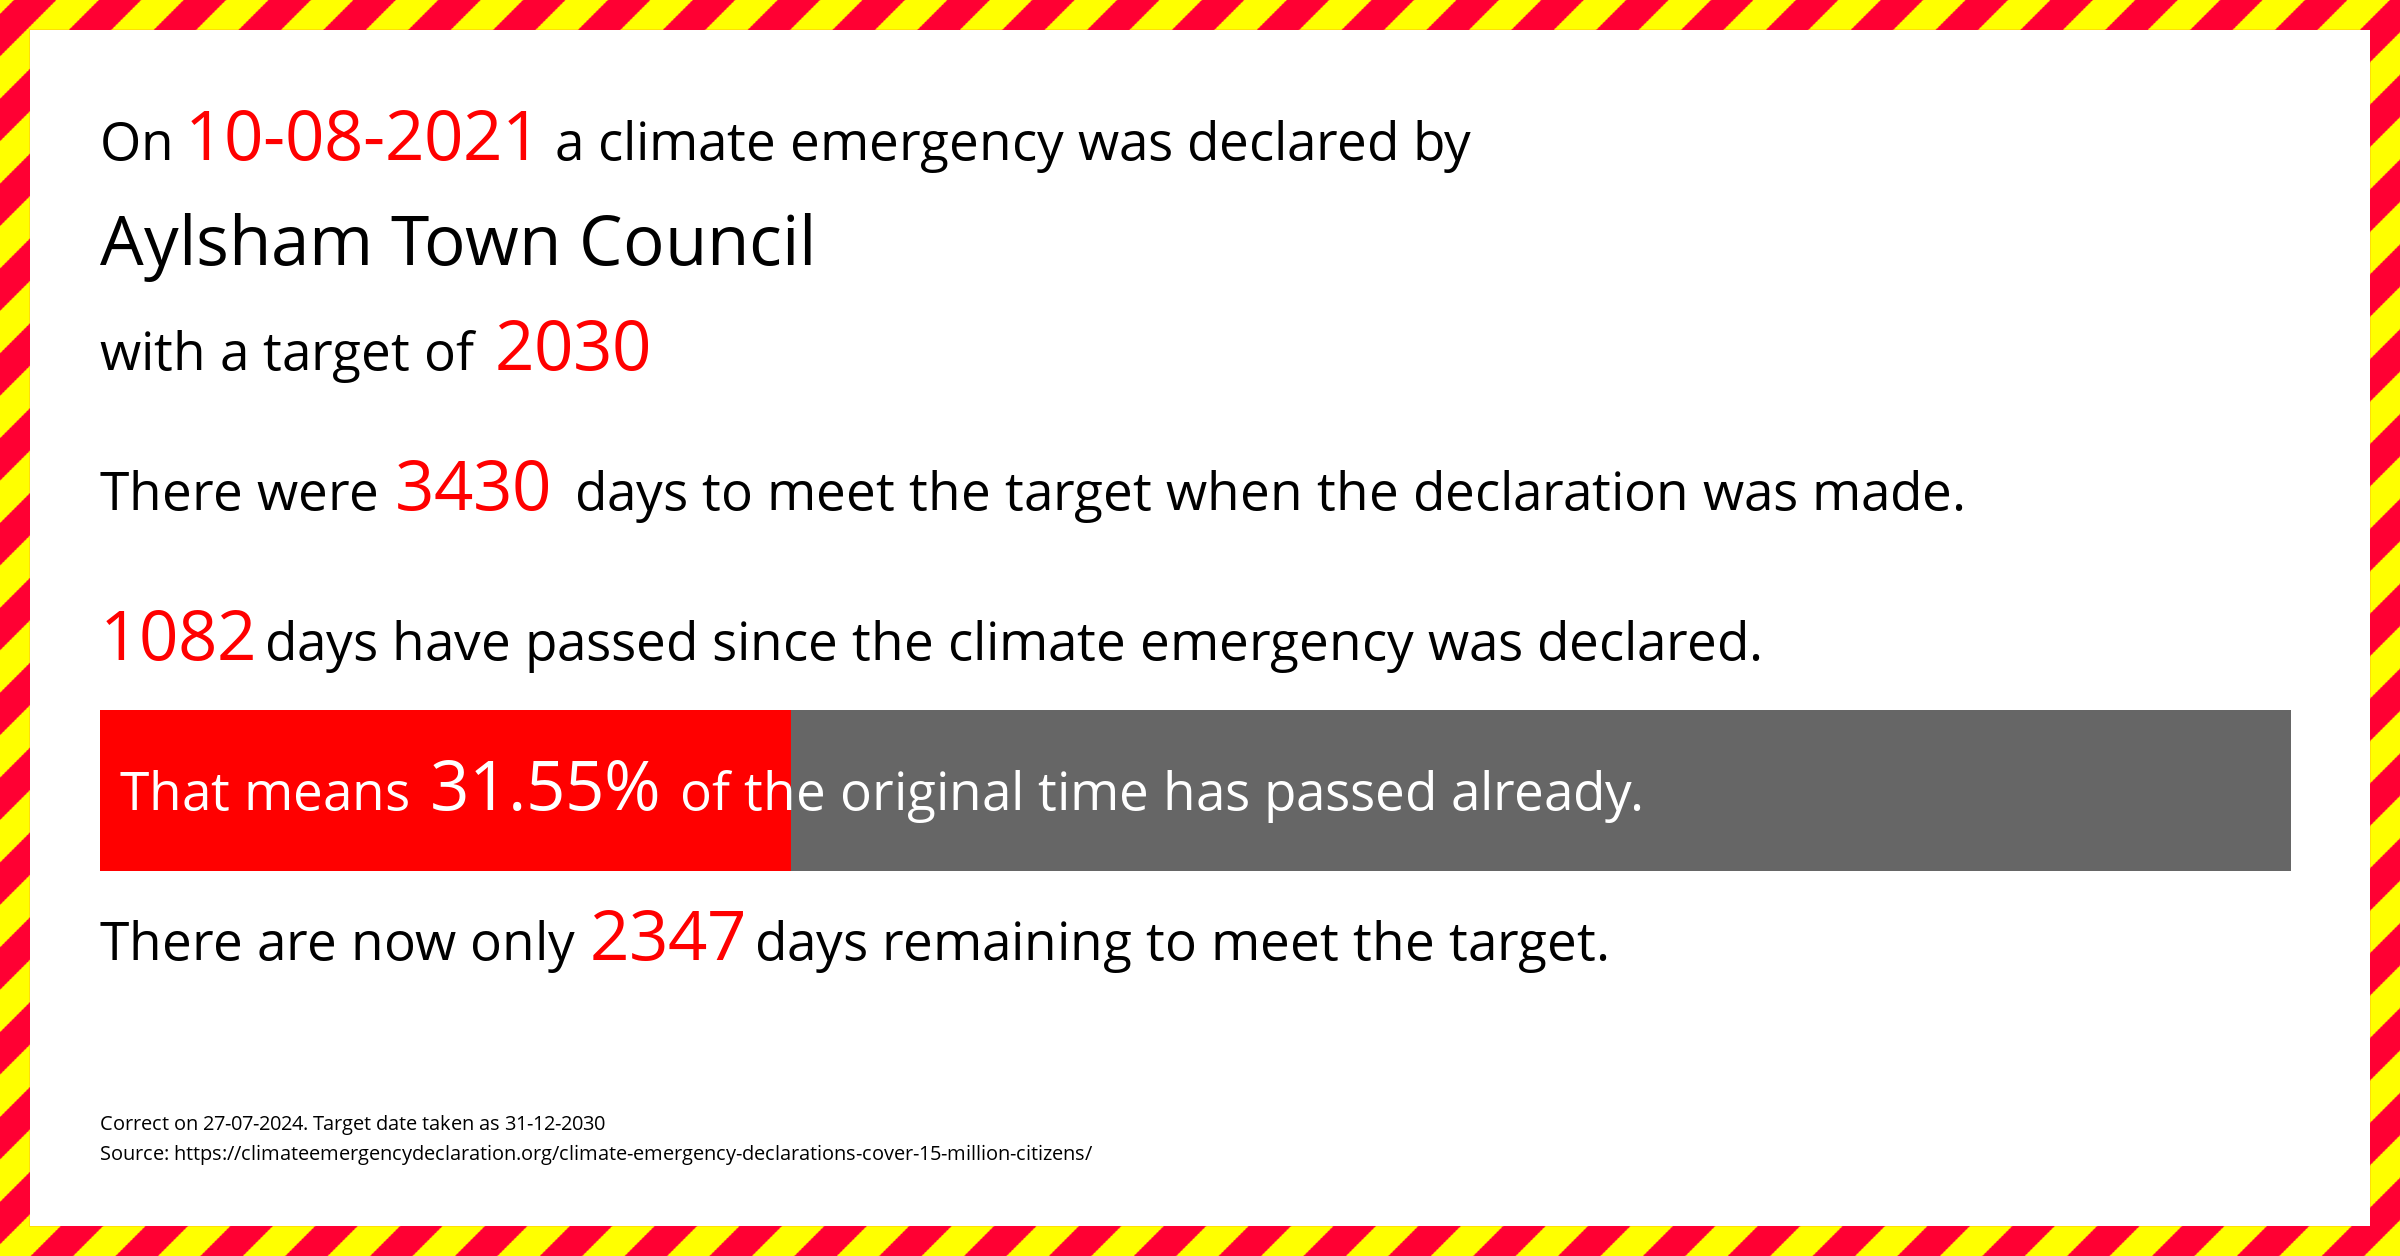 Aylsham Town Council  declared a Climate emergency on Tuesday 10th August 2021, with a target of 2030.